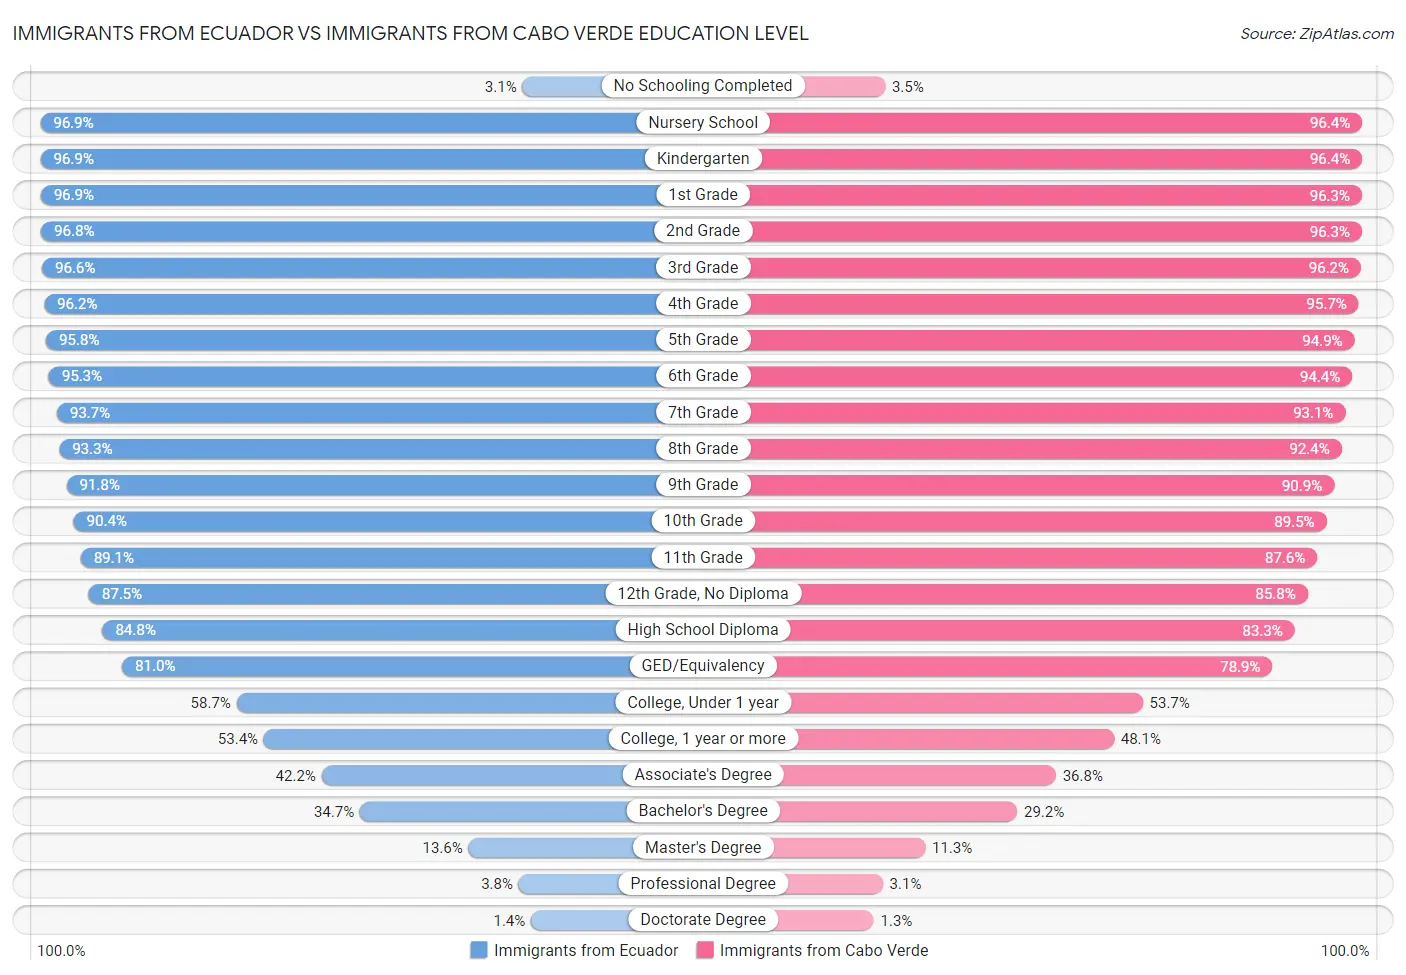 Immigrants from Ecuador vs Immigrants from Cabo Verde Education Level